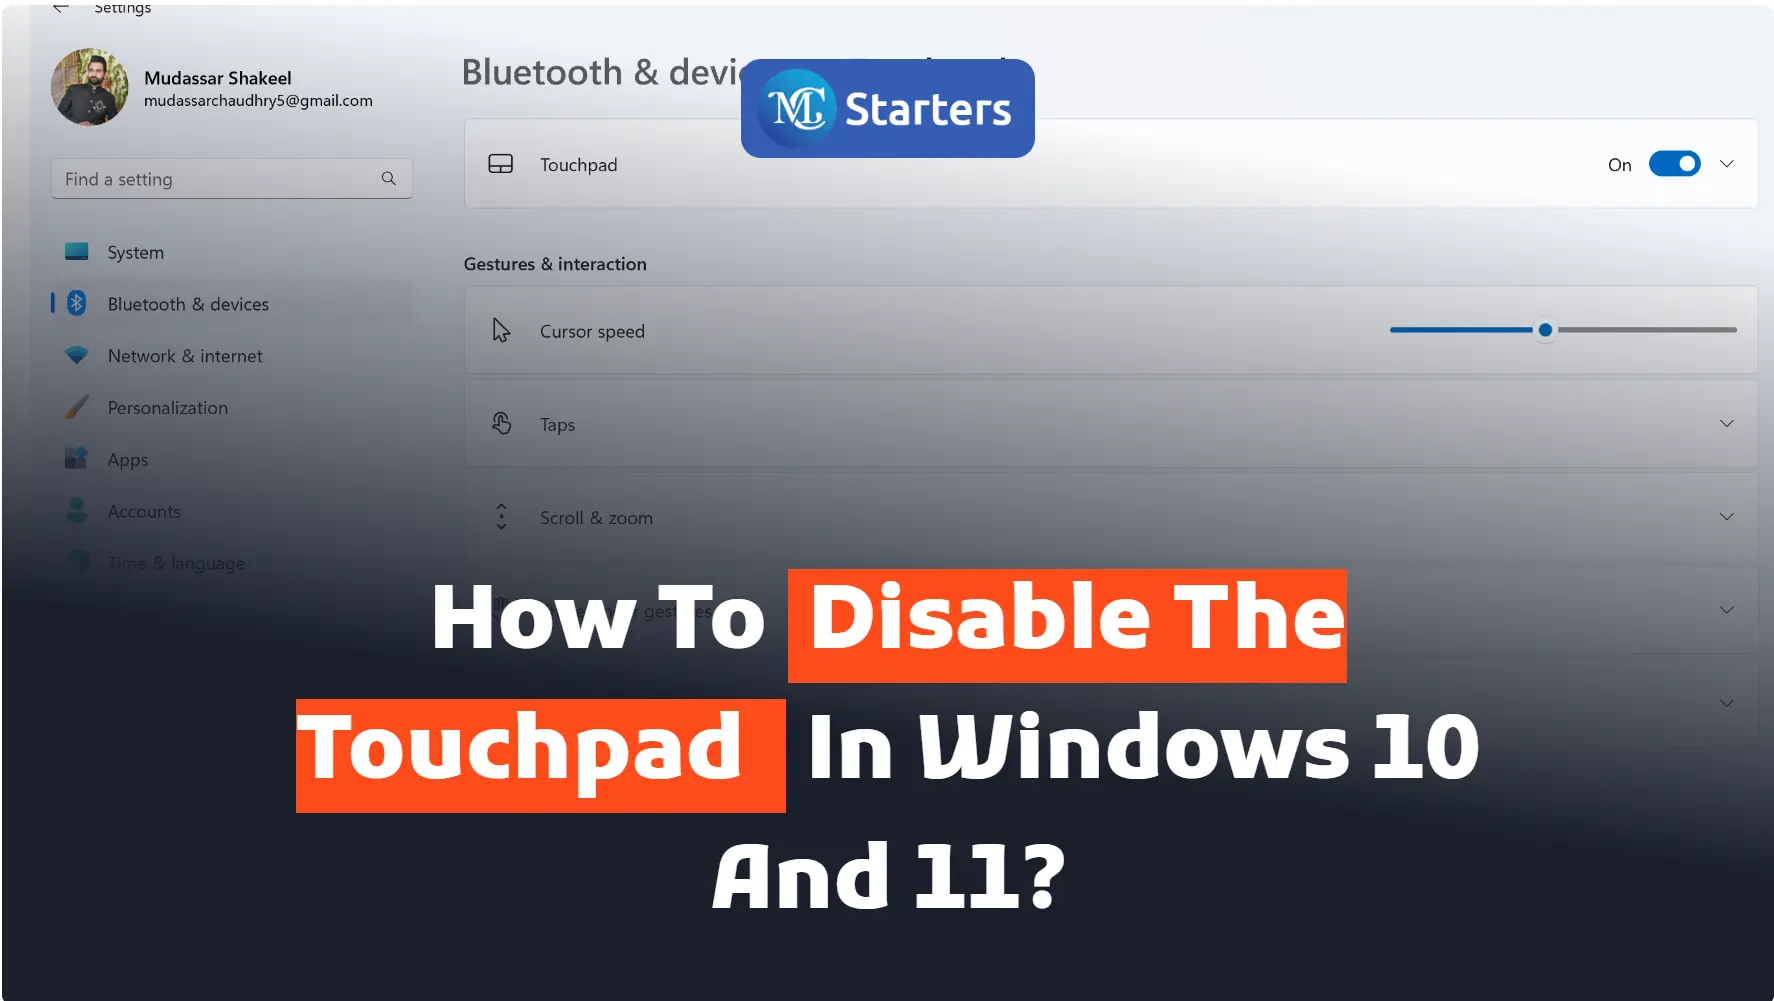 How to Disable the Touchpad on Windows 10 and 11?